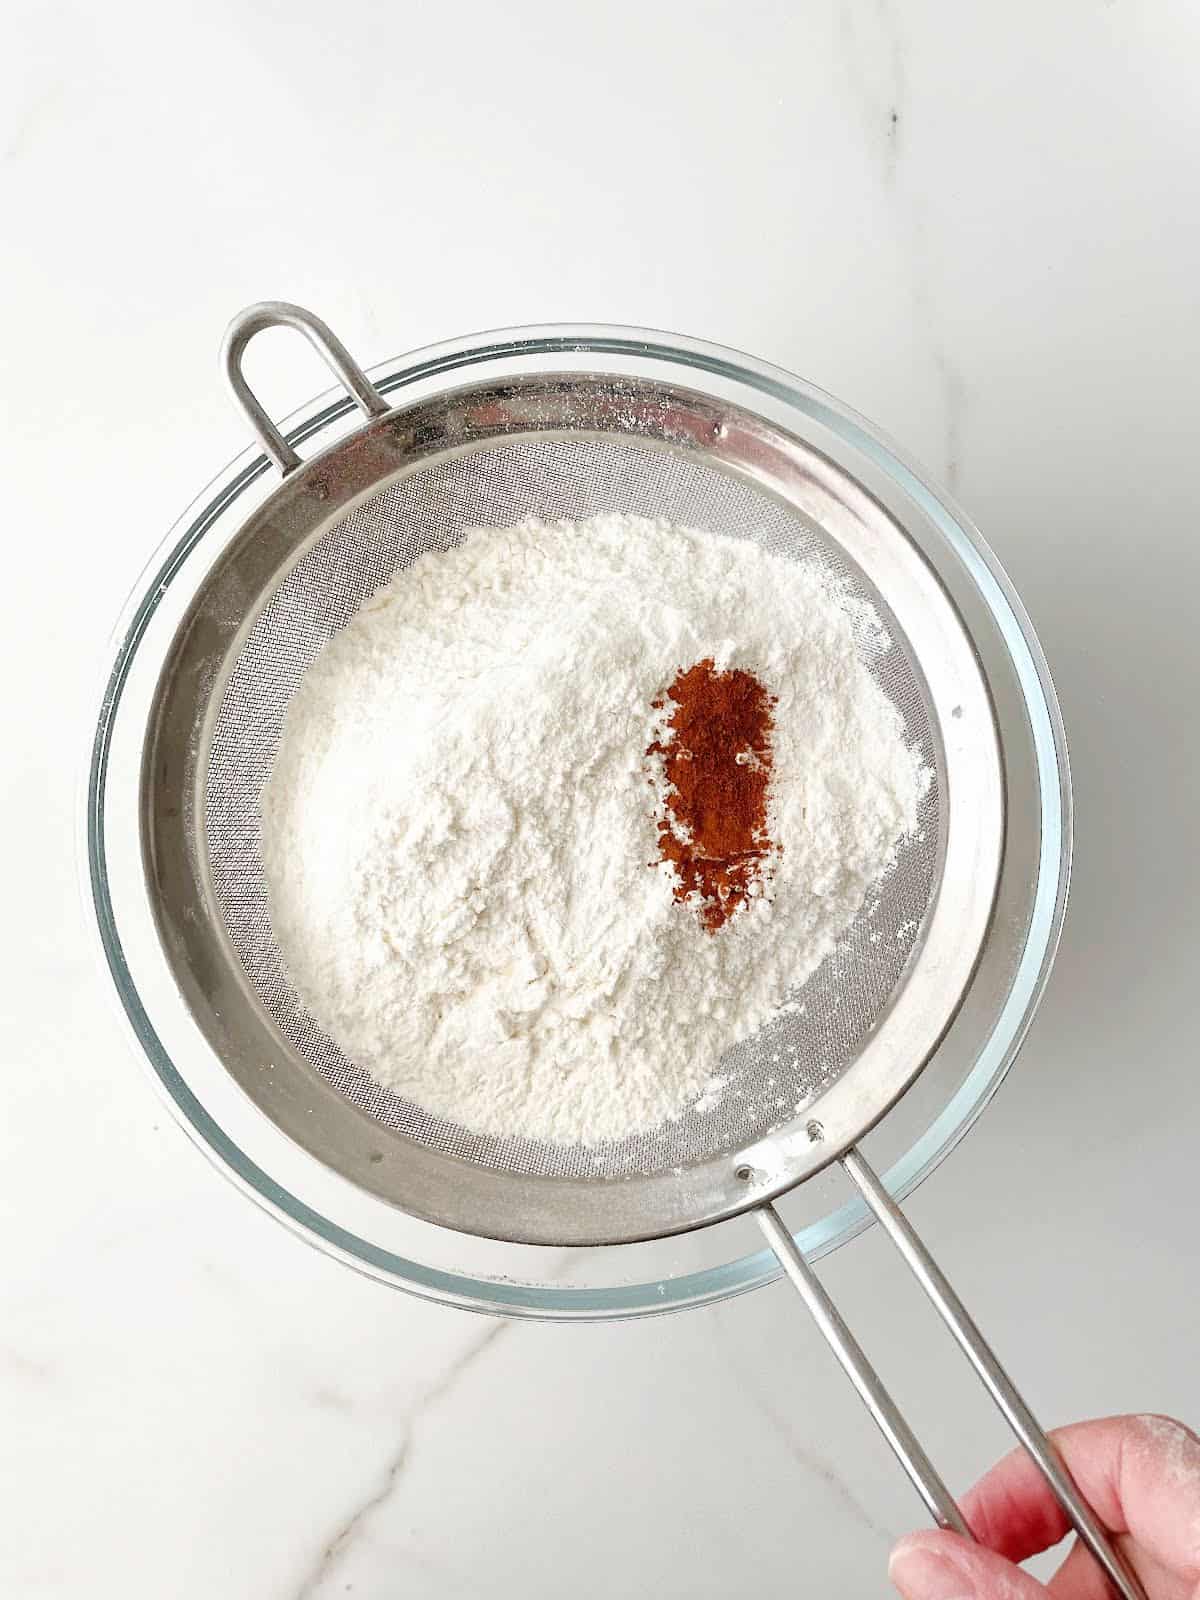 Sifting flour mixture and cinnamon over a glass bowl set on a white marble surface.